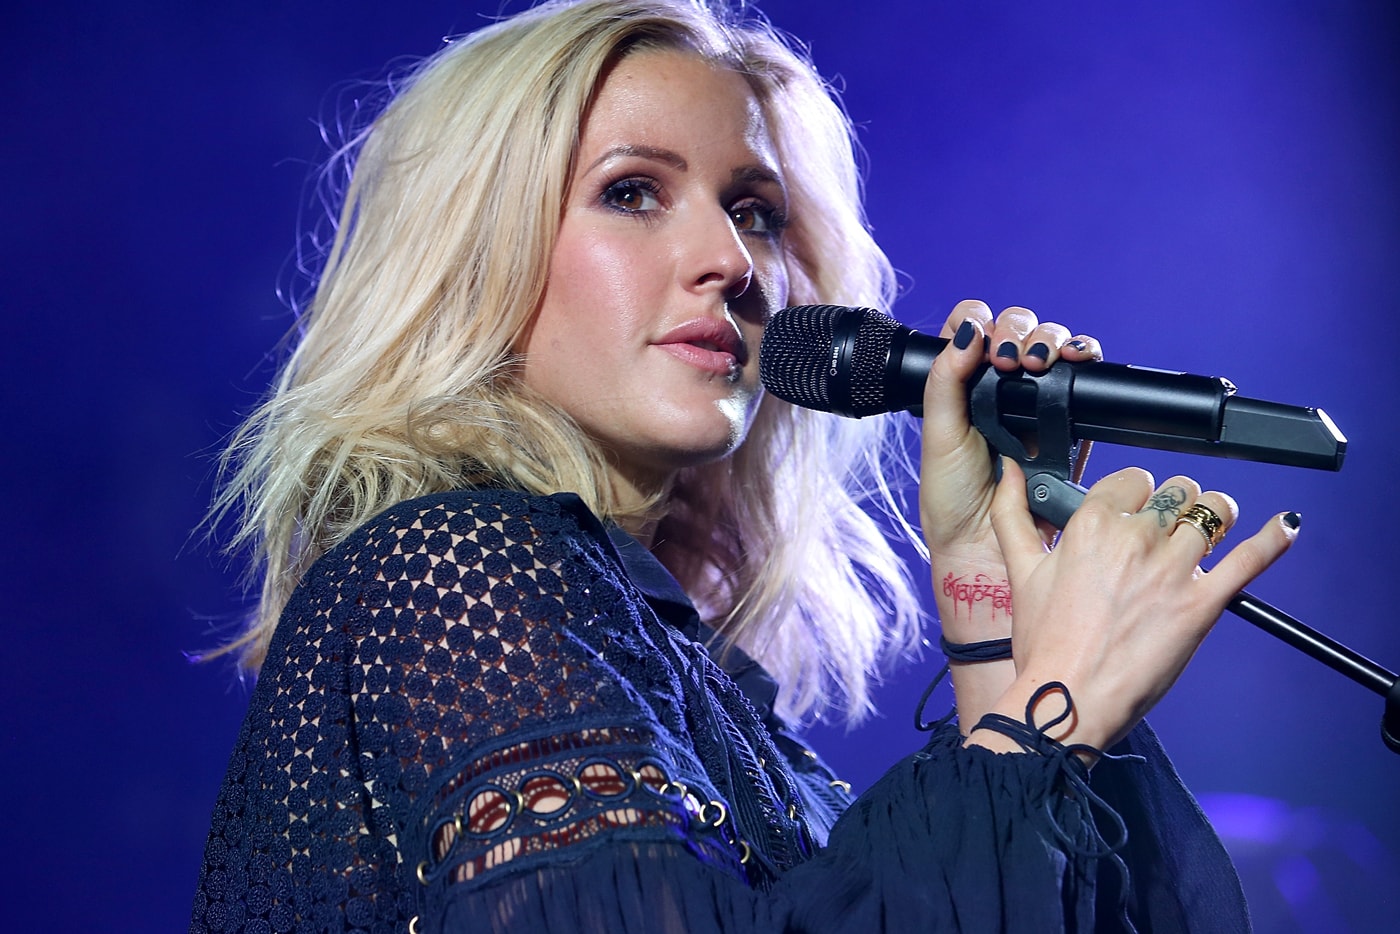 Ellie Goulding – Only Girl (In The World) (Rihanna Cover) (BBC Radio 1′s Live Lounge)